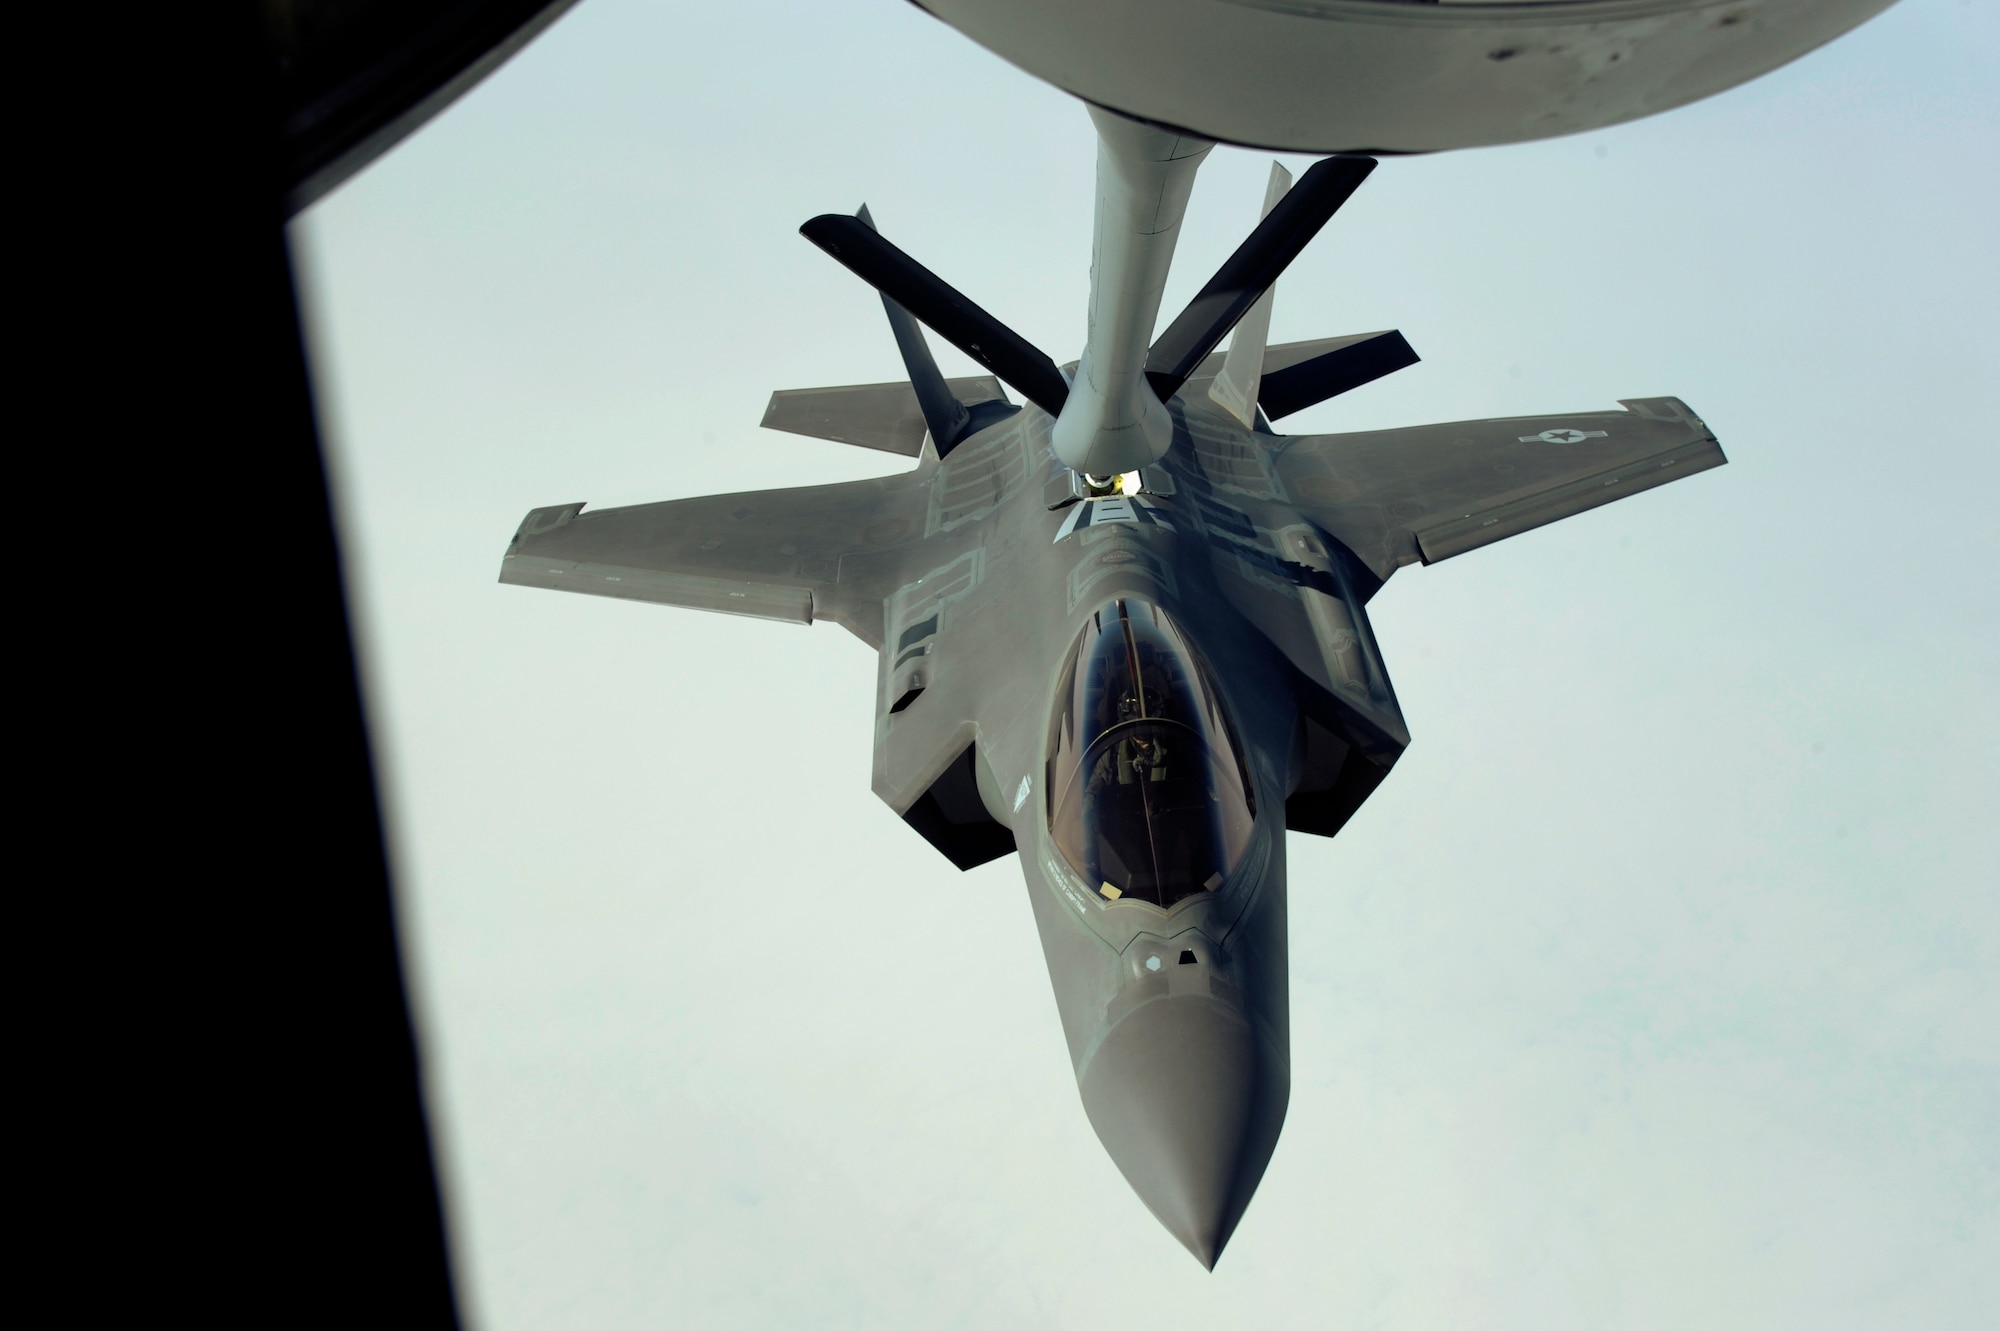 U.S. Air Force F-35 Lightning II being refueled by a KC-135 Stratotanker.